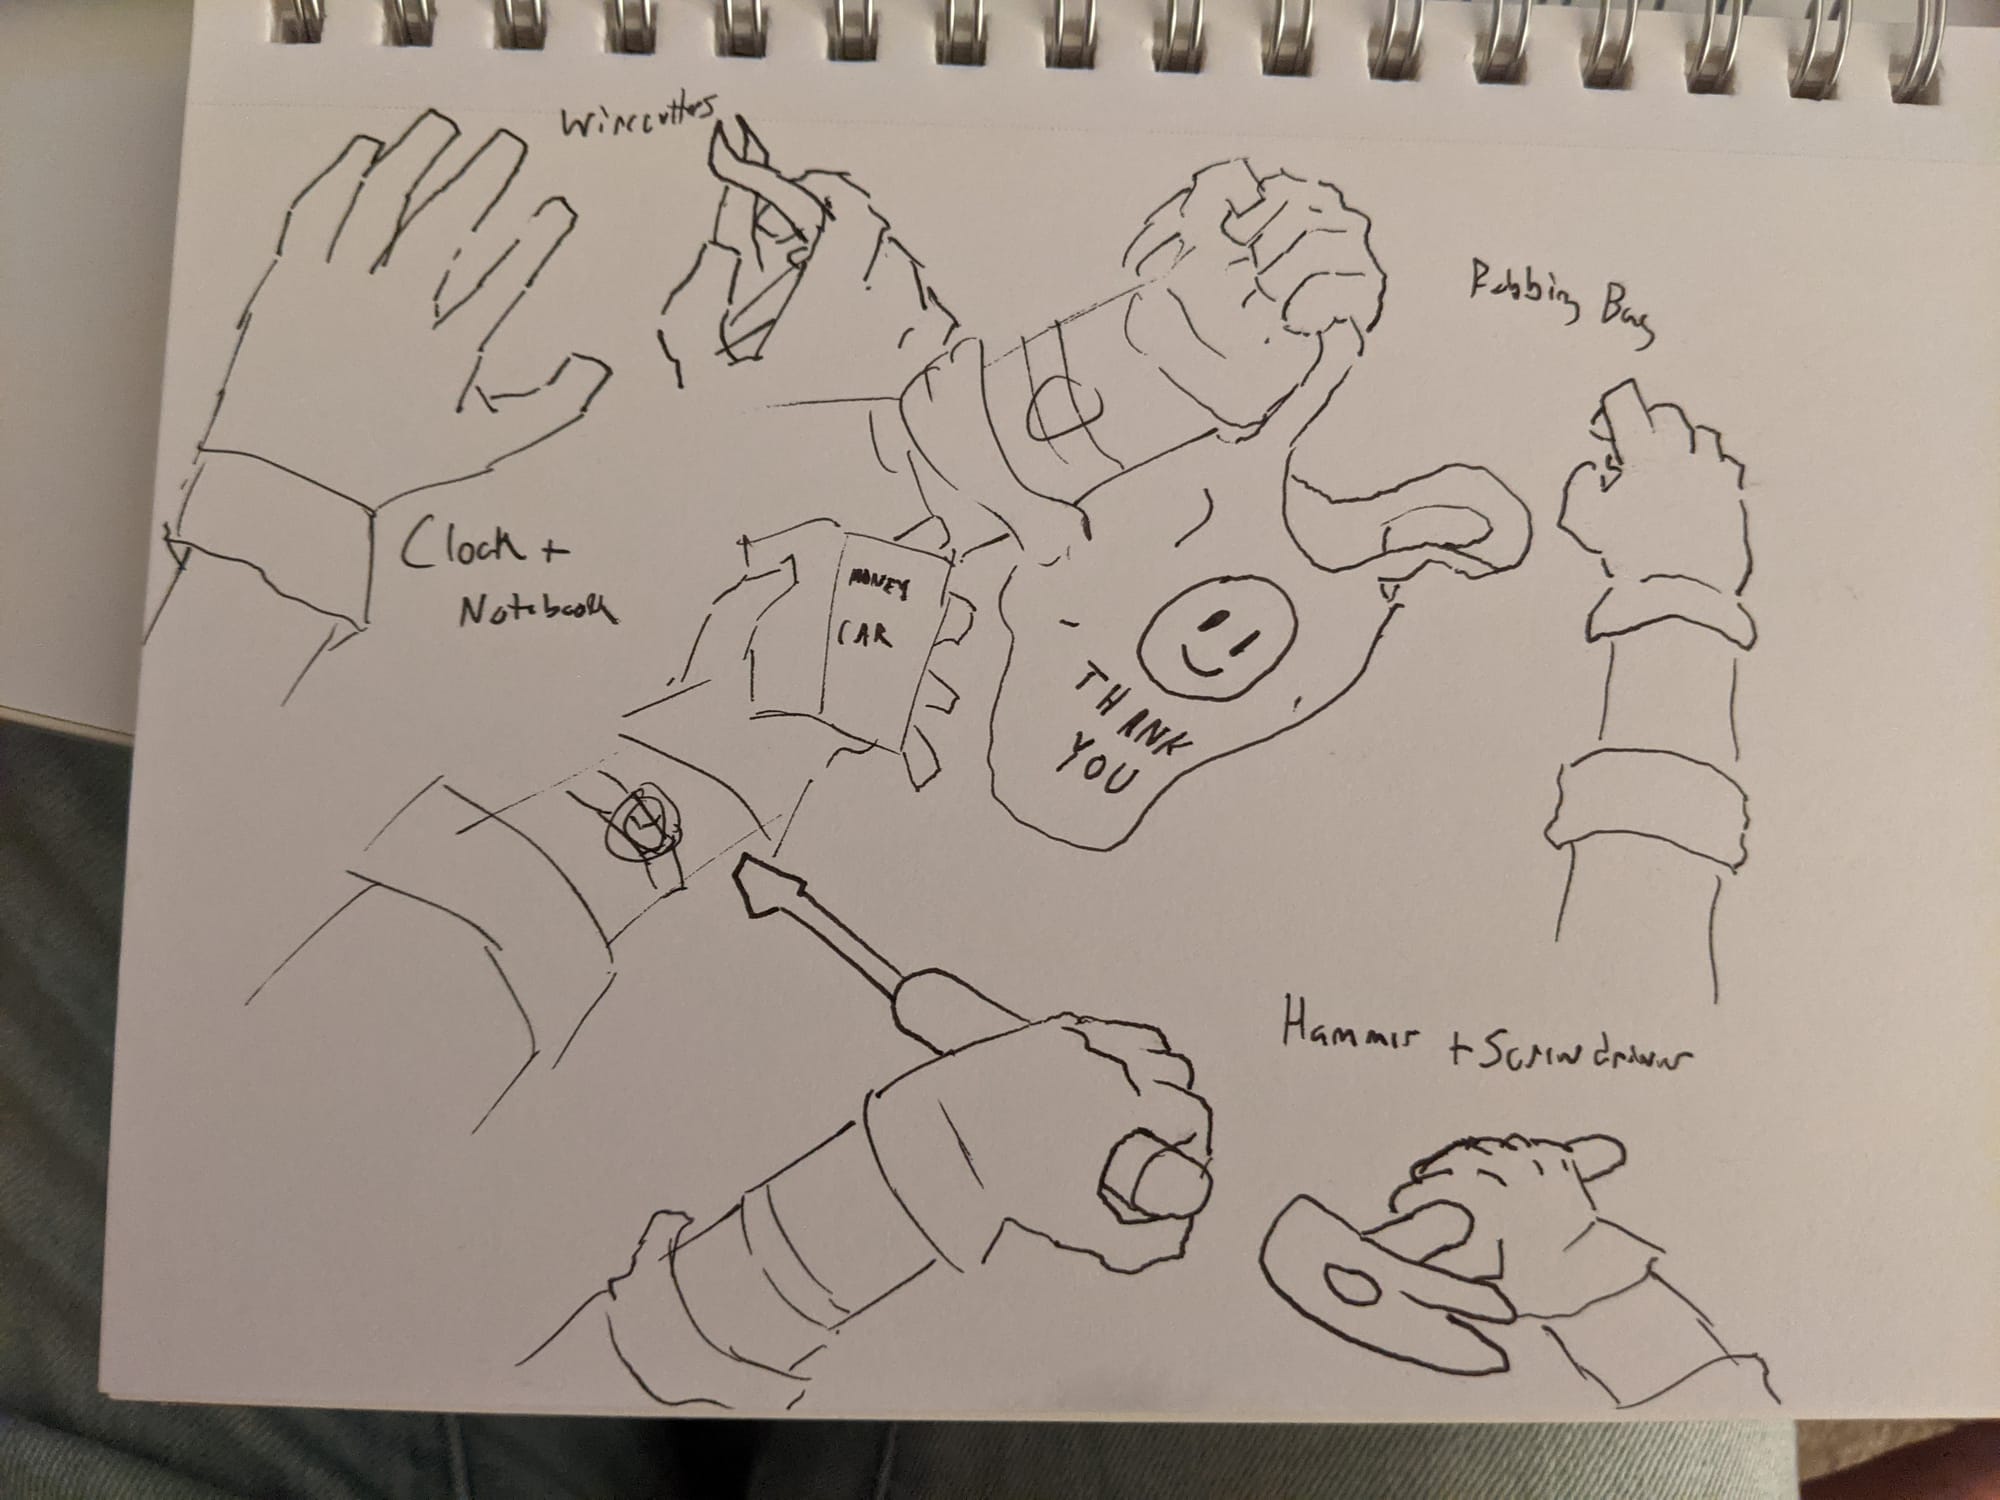 A sketchbook page filled with drawings of the player's hands holding various tools and a bag.